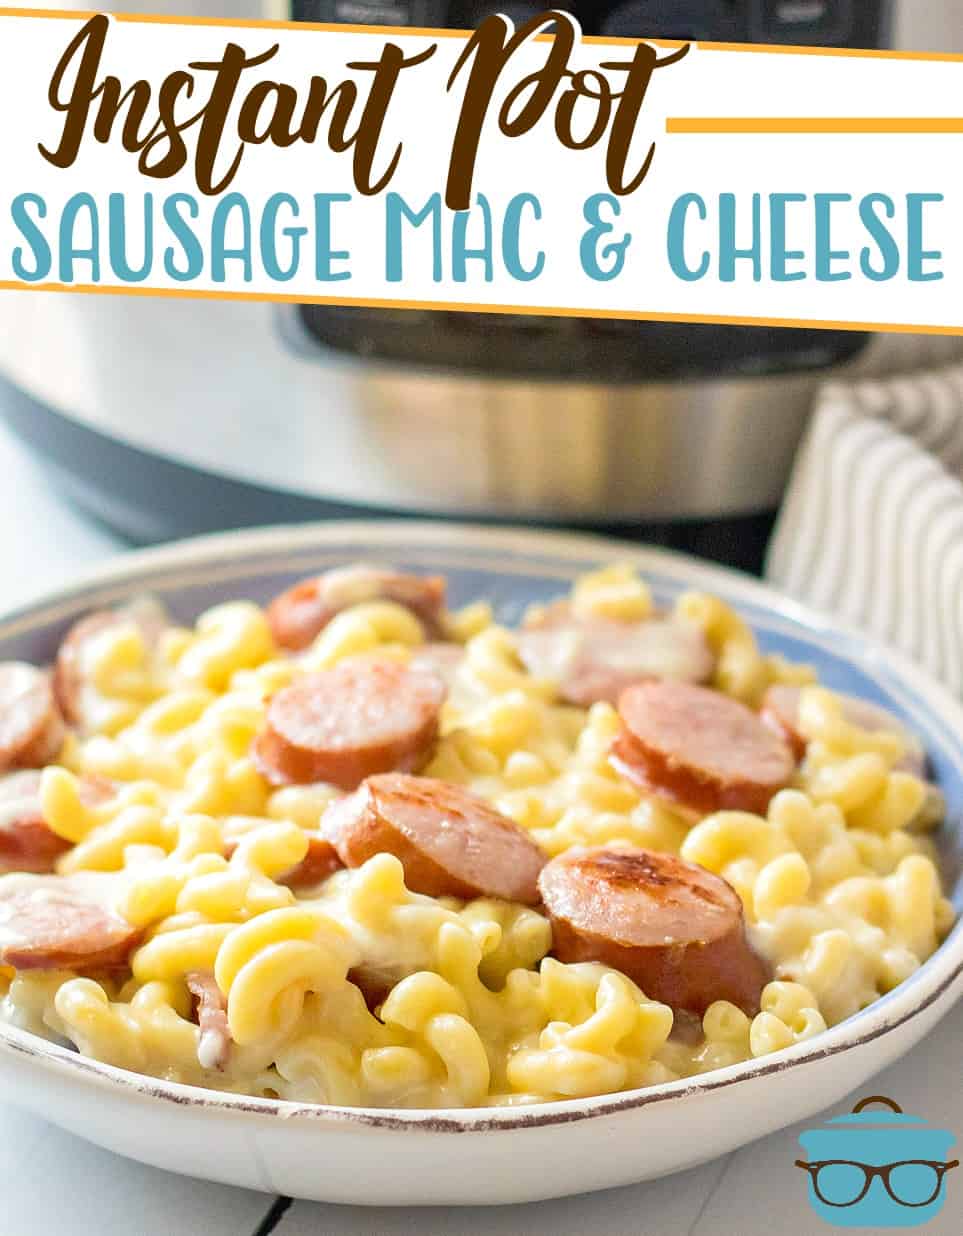 Instant Pot Kielbasa Sausage with Macaroni and Cheese served in a bowl with an electric pressure cooker in the background.